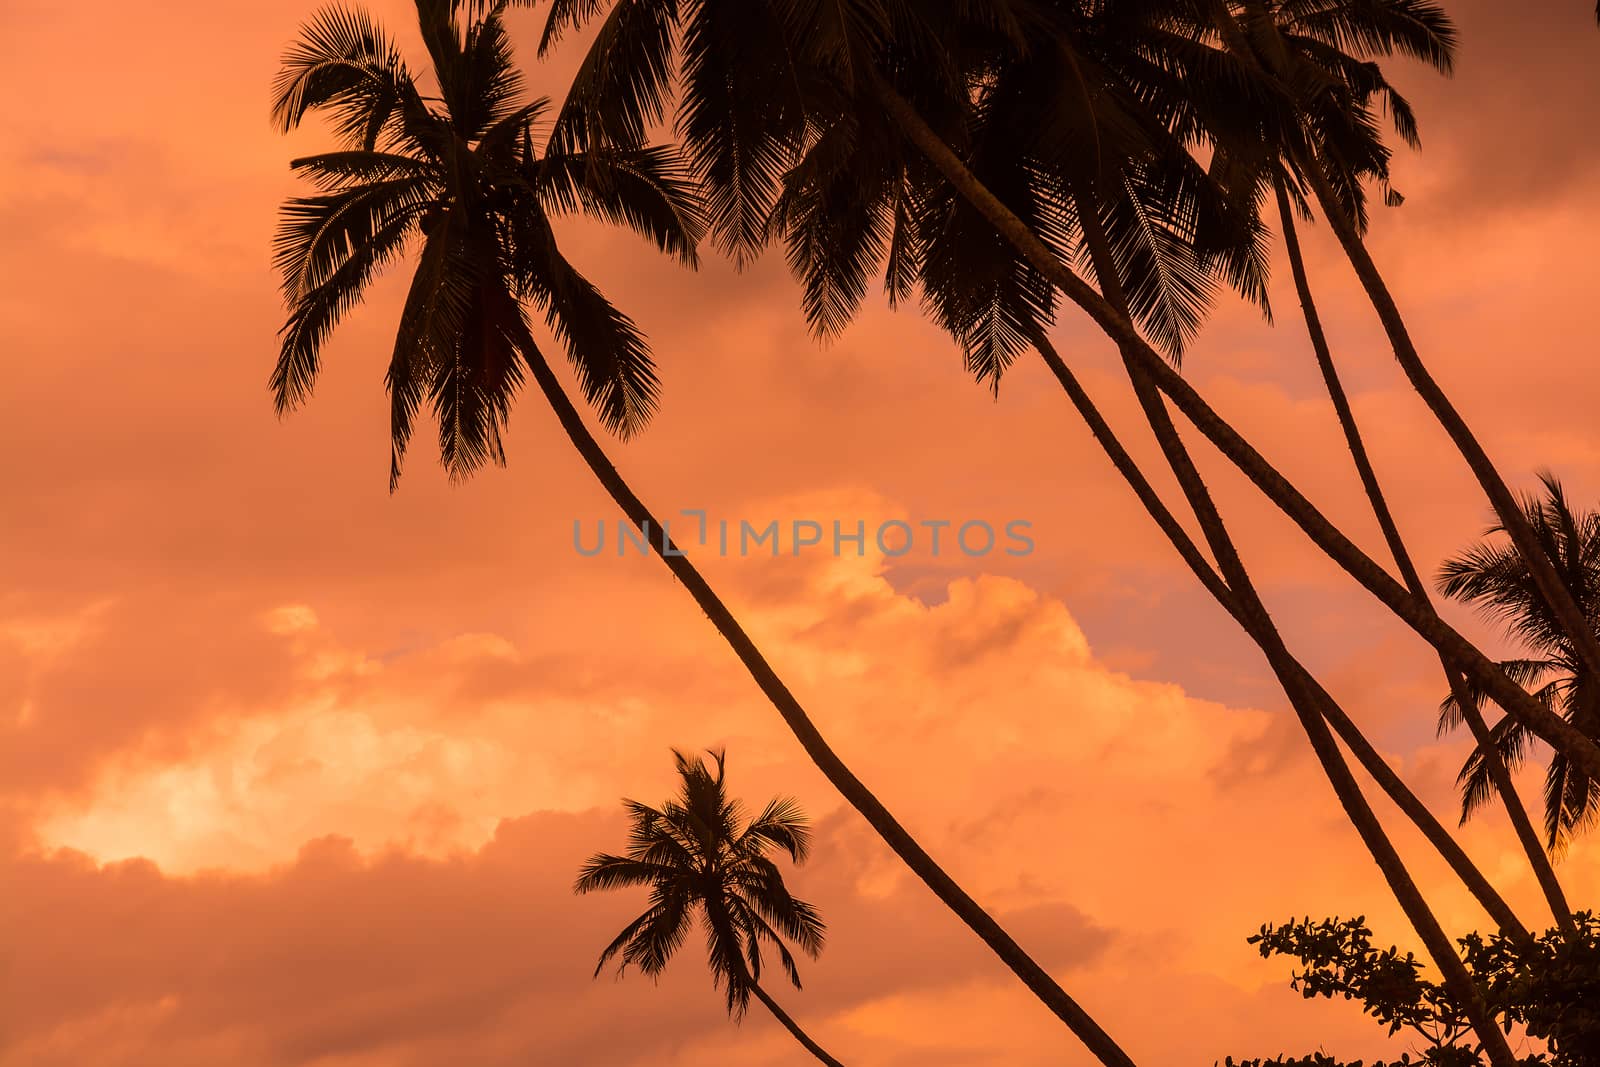 Palm silhouettes warm Living Coral skies by ArtesiaWells